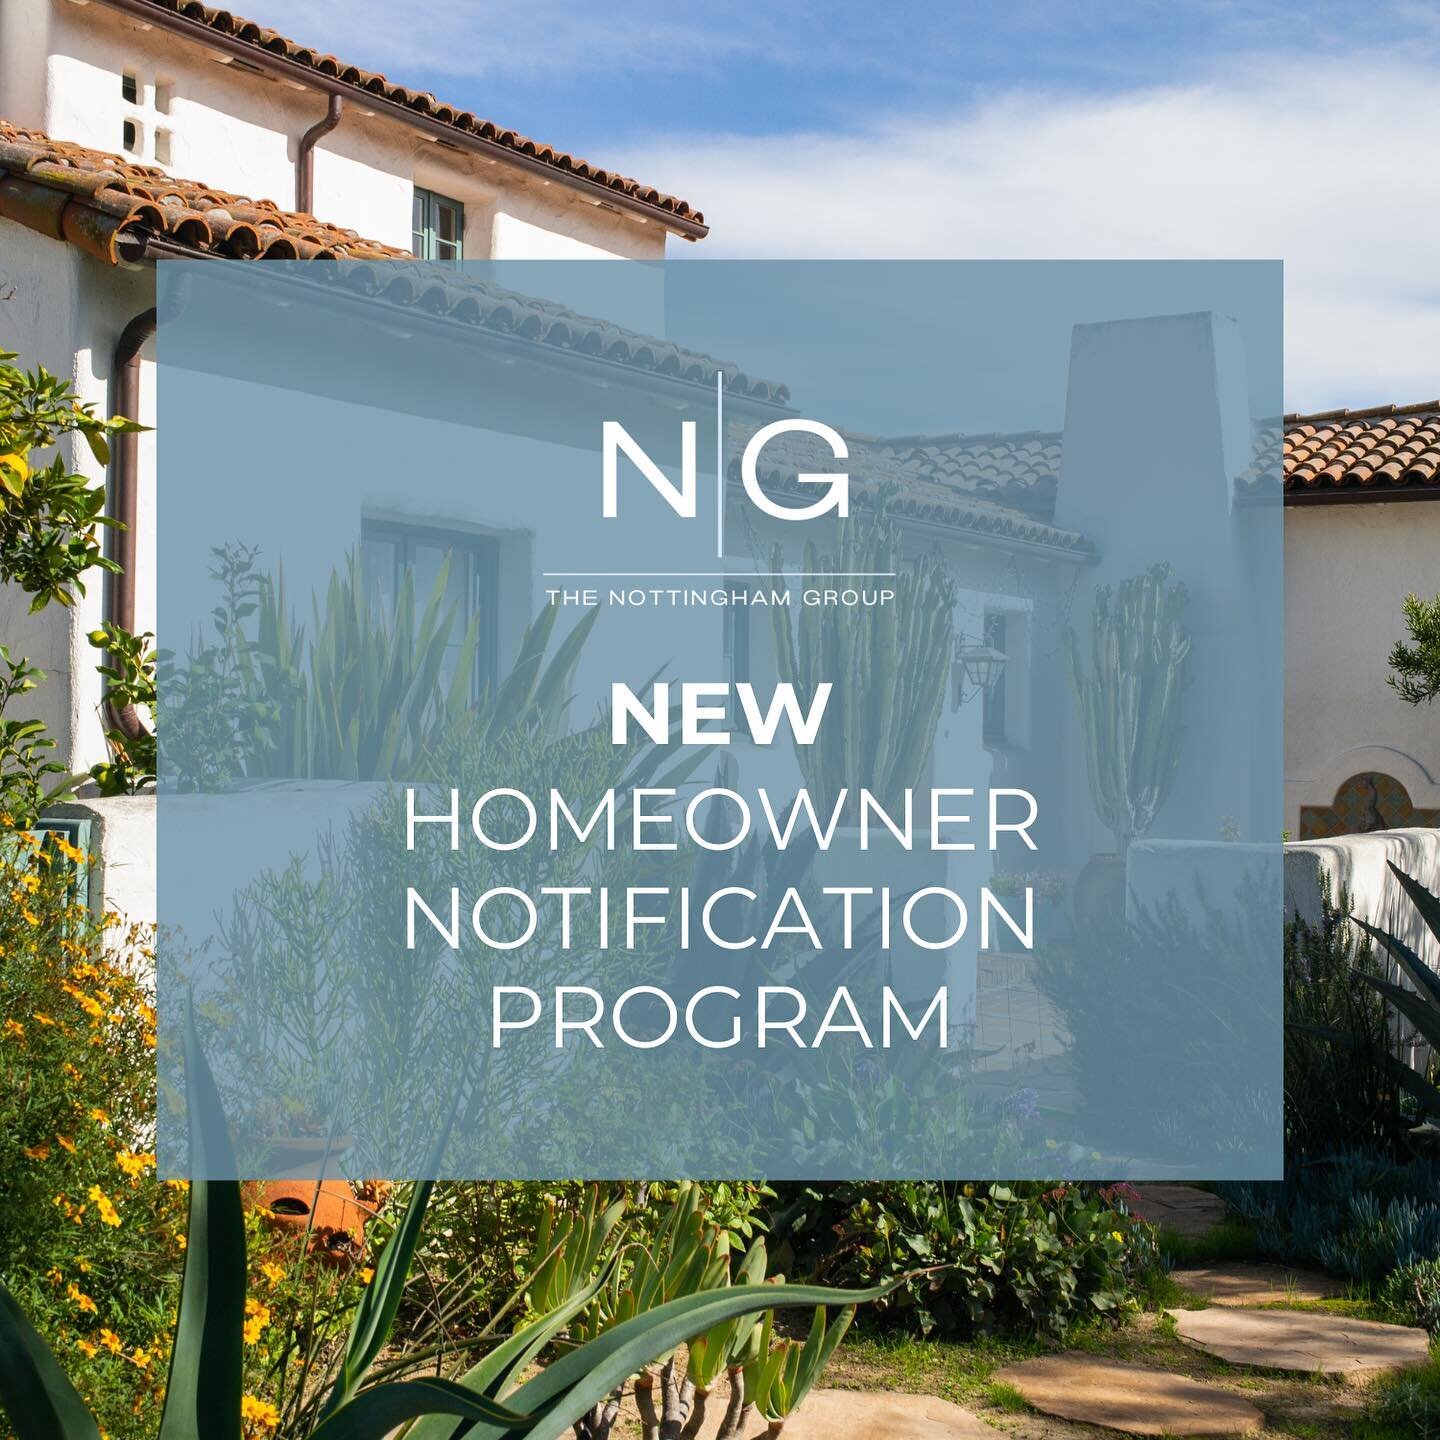 Sign up for the new enhanced homeowner notification program released by Los Angeles County Registrar Recorder&lsquo;s office. If there&rsquo;s ever a change in ownership or loans taken out against your home, you will be mailed copies of the documents